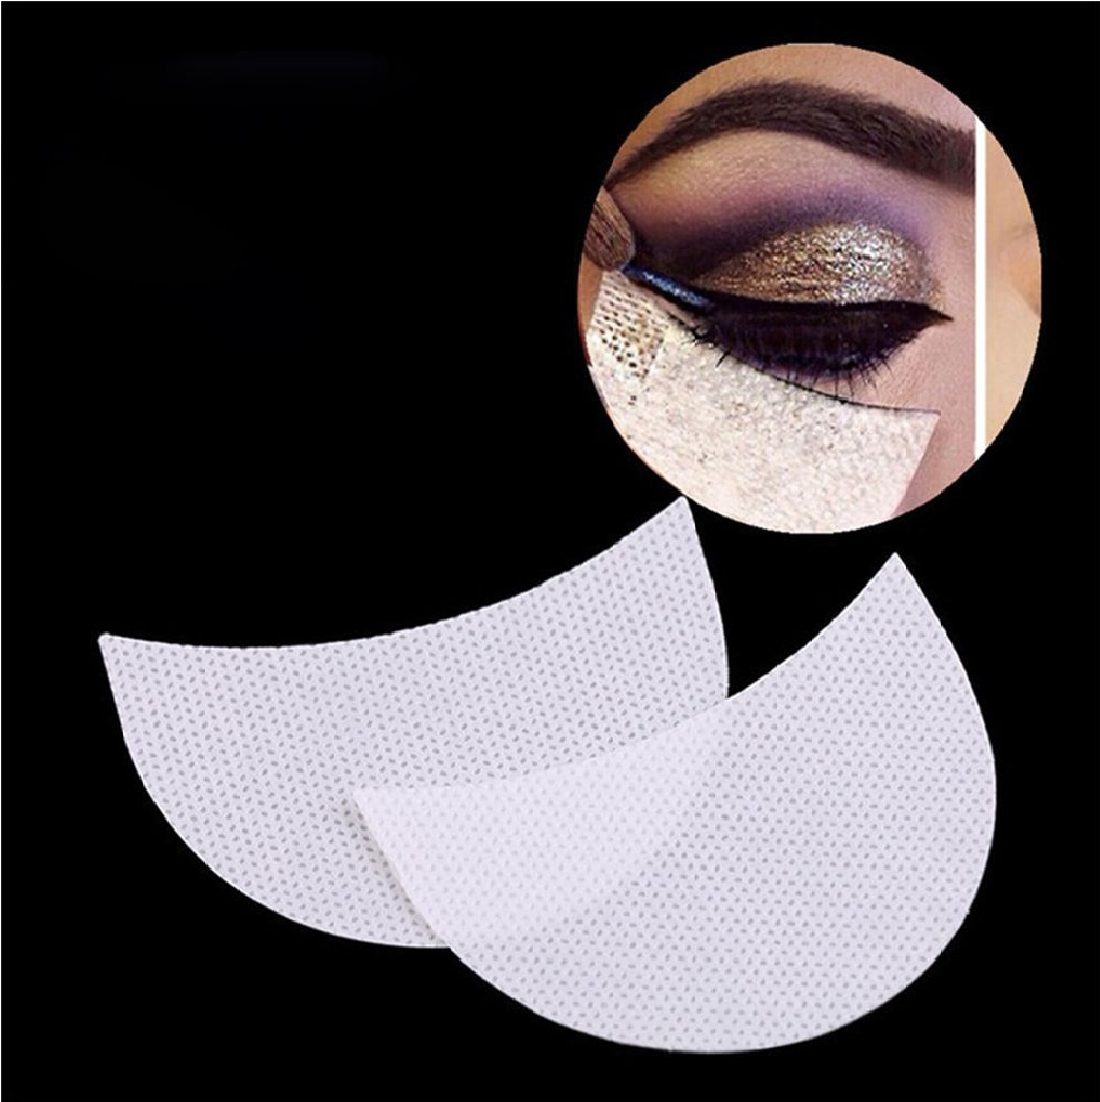 Sozzumi Eyeshadow Shields Under Eye Patches Disposable, Prevent Eyelash Extensions Pads and Eye Tips Sticker Wraps Make Up Tools (20 Pcs)